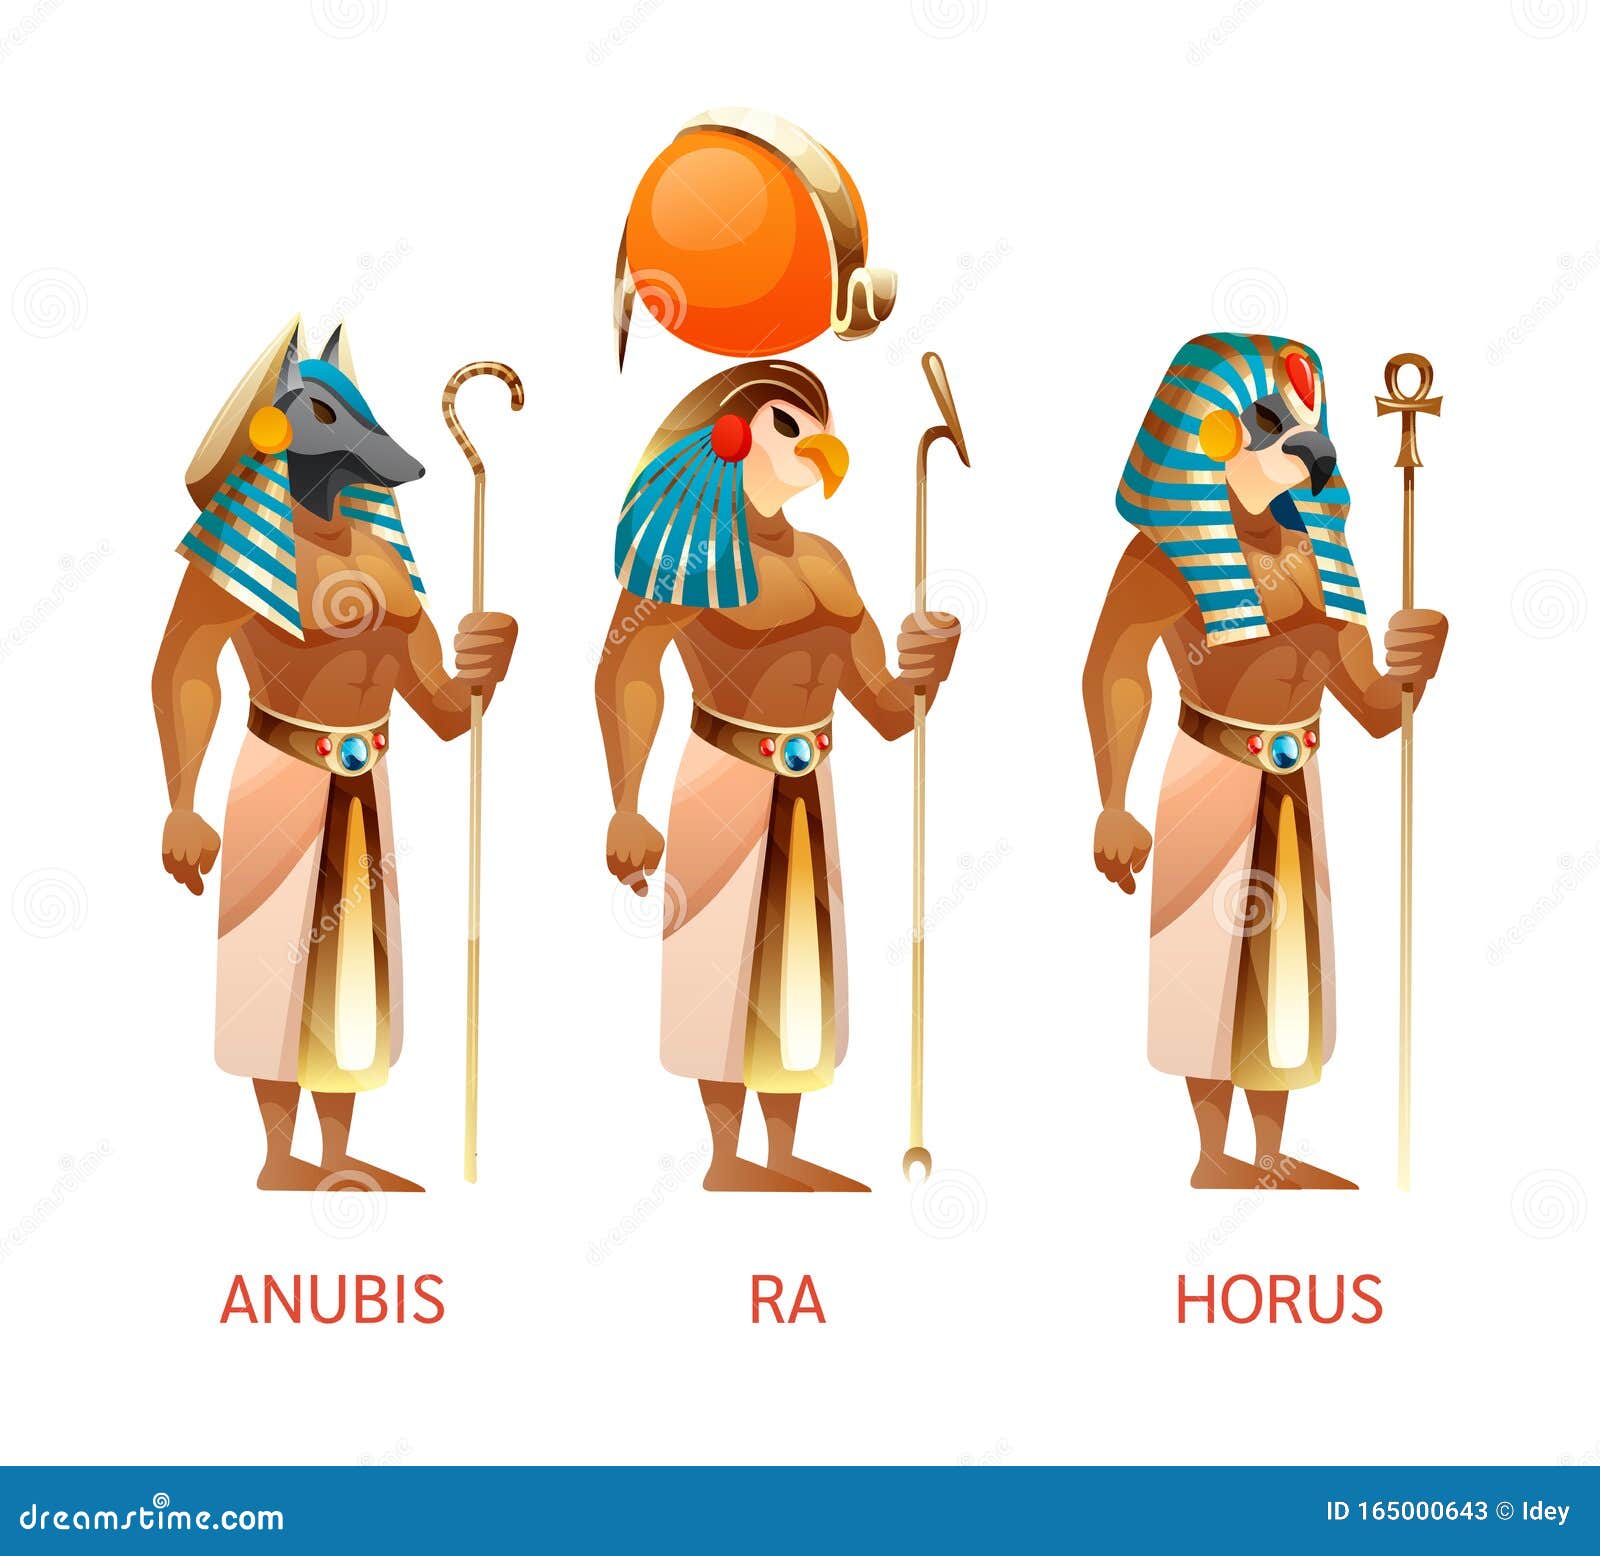 Horus Cartoons Illustrations And Vector Stock Images 2202